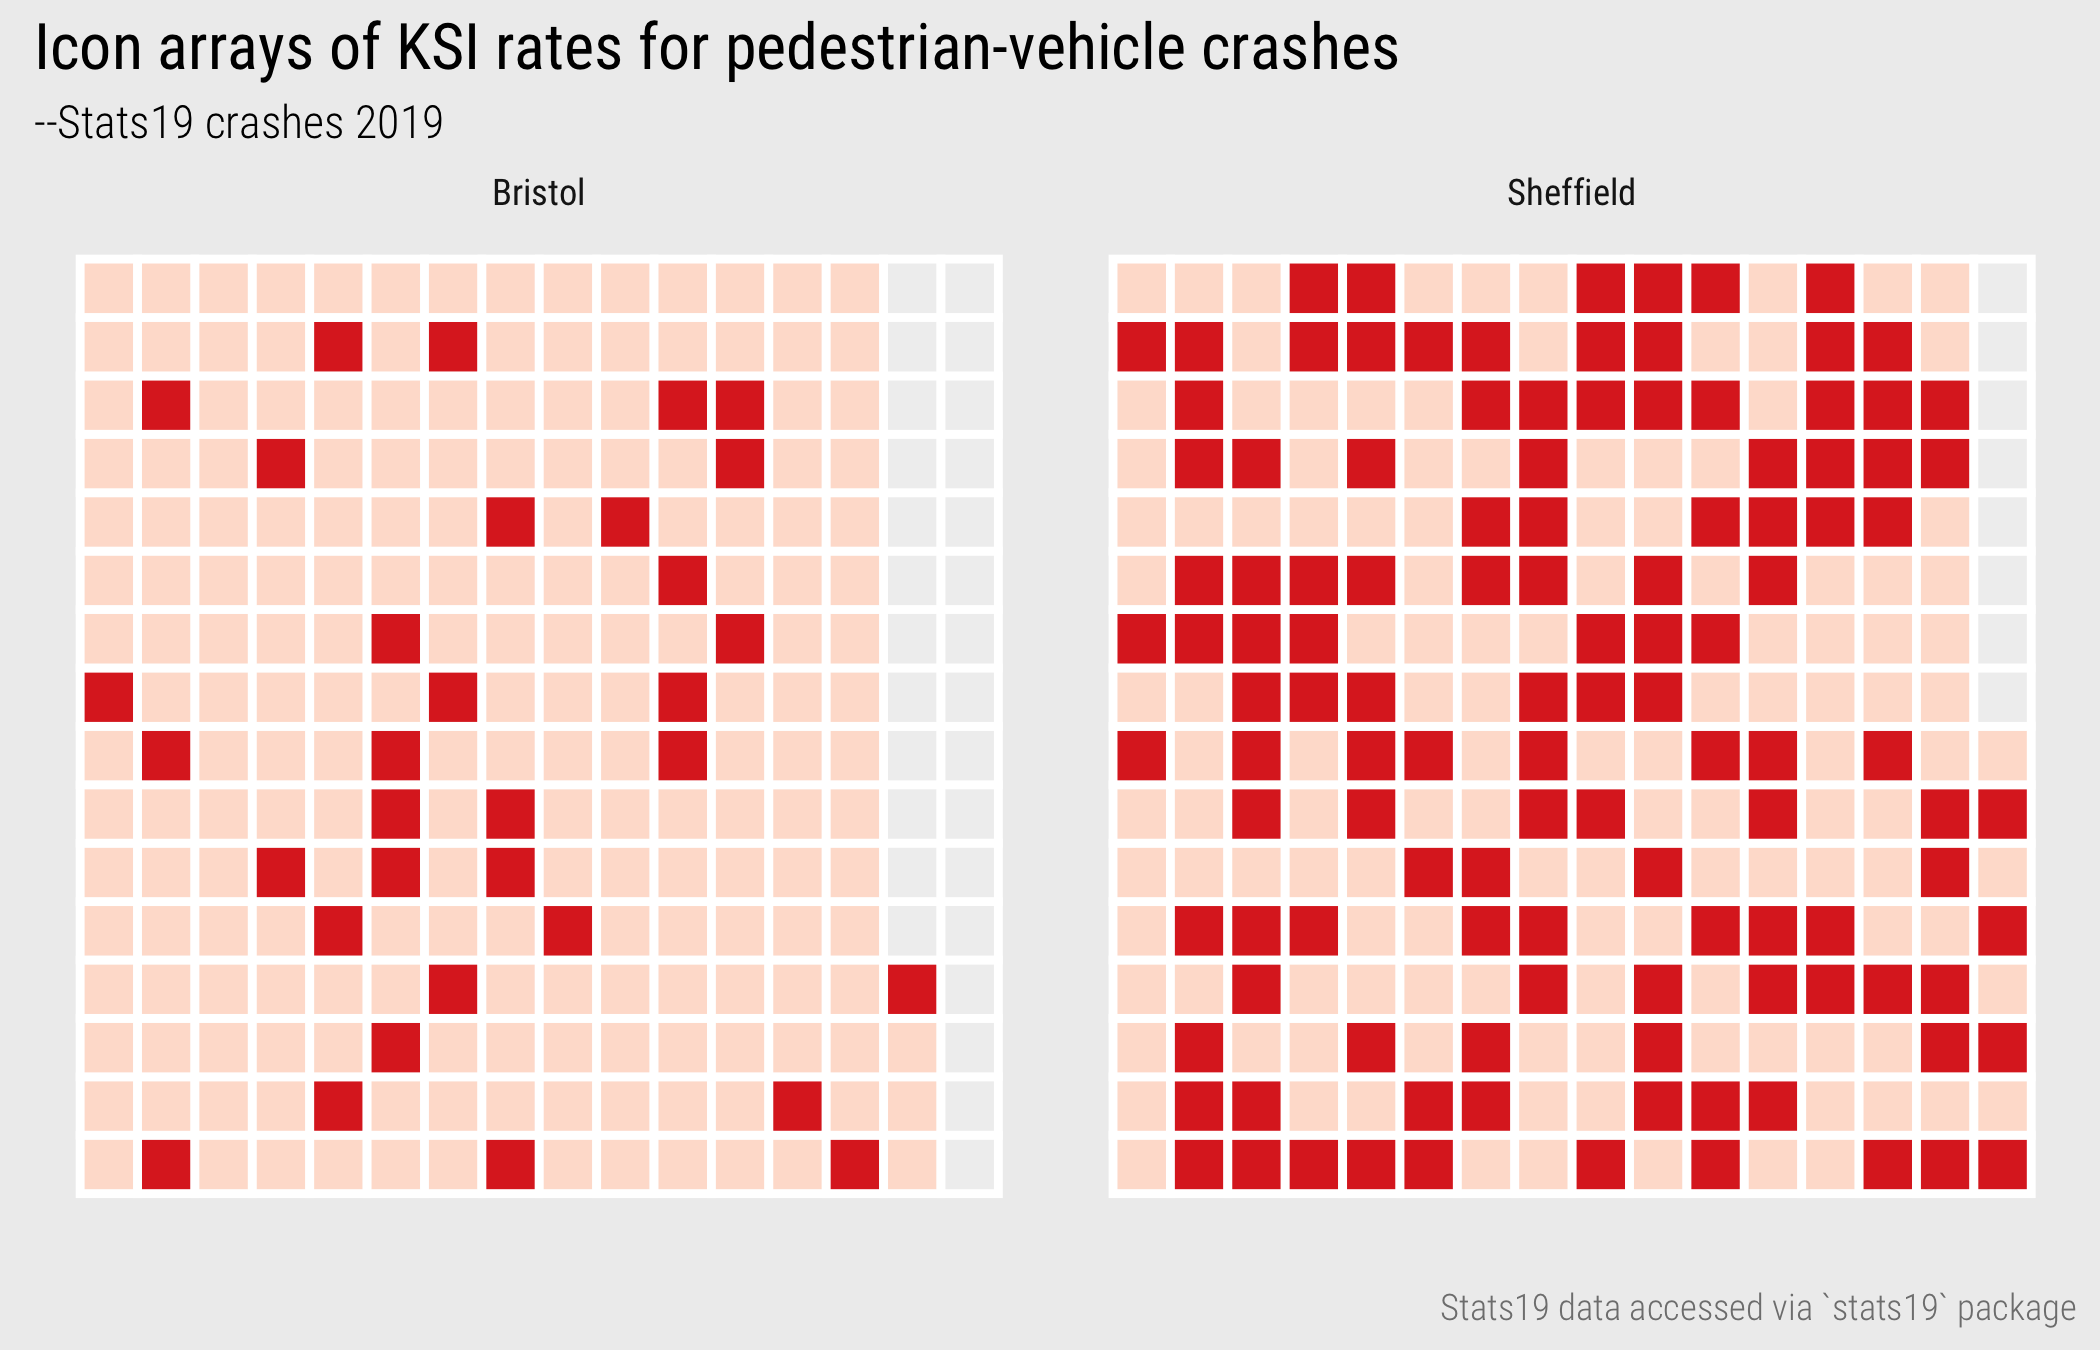 Icon array displaying injury severity rates for Pedestrian-Vehicle crashes.